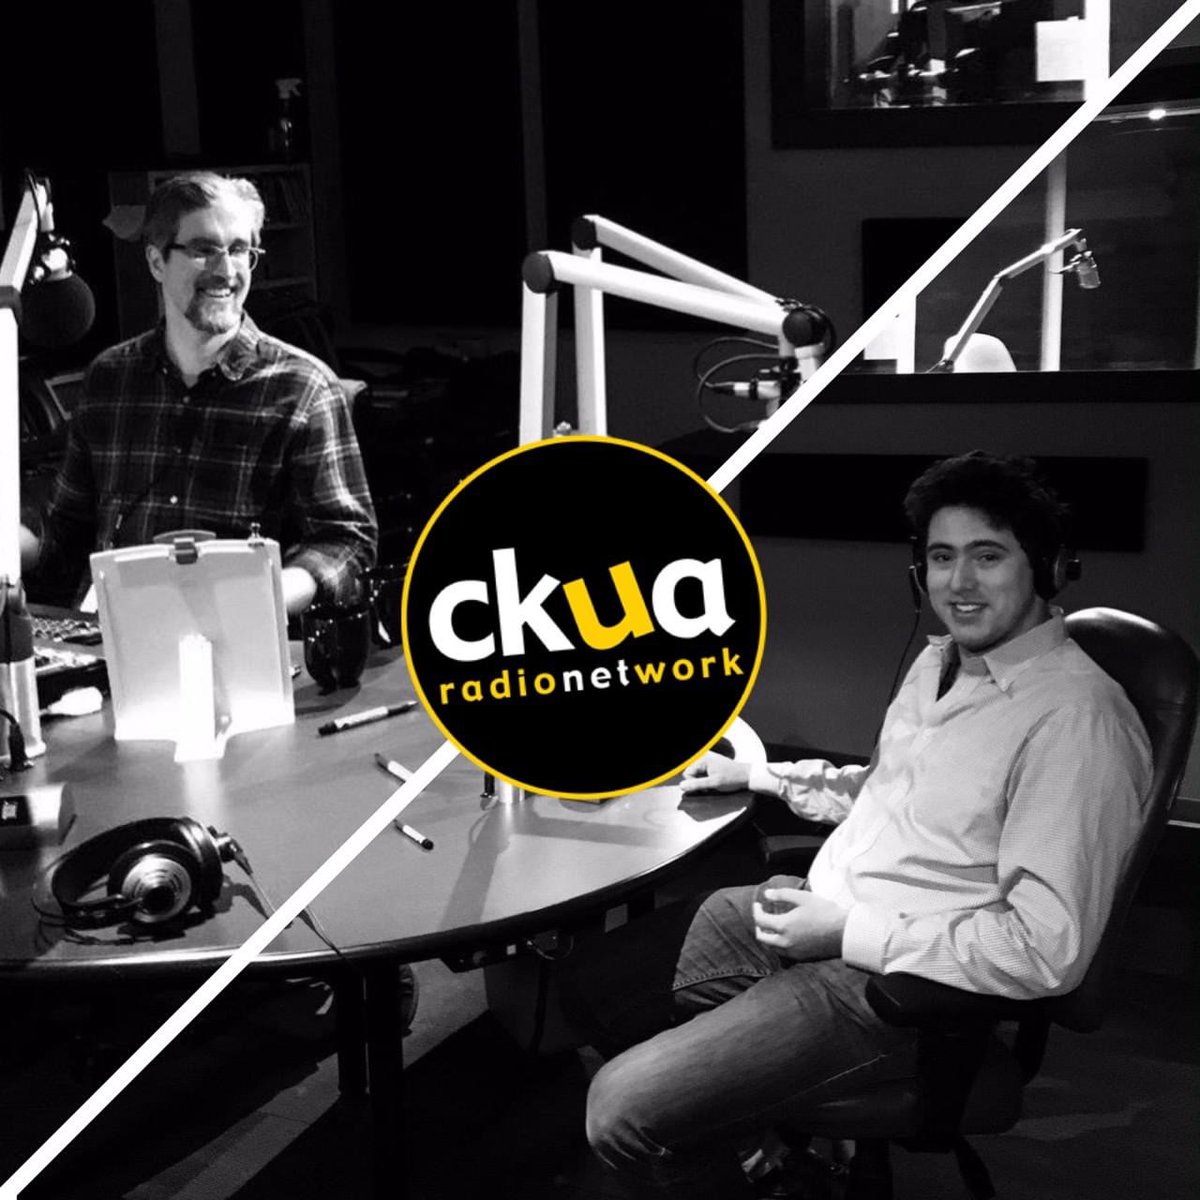 So wonderful to be back at @ckuaradio at their gorgeous downtown Edmonton location with the amazing @GrantStovel to talk about this week’s concert with the @edmsymphony. We have a wonderful history going back so many years now - sharing everything from Leonard Cohen to Bruckner